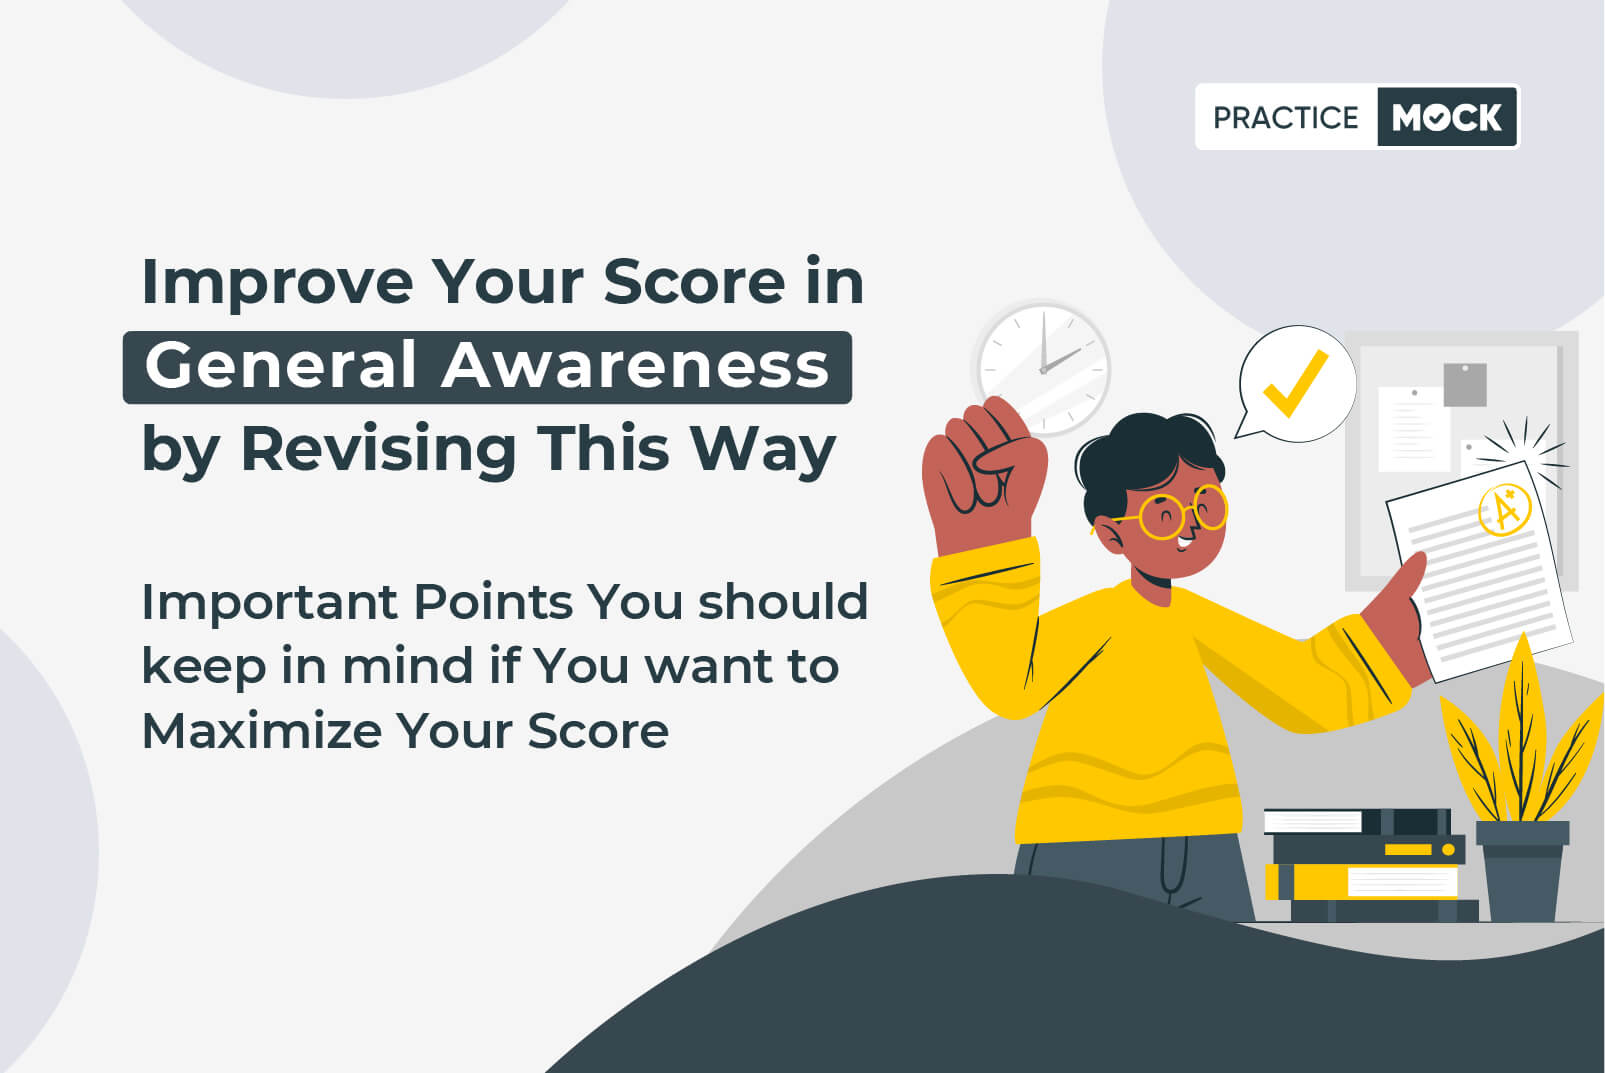 Improve Your Score in General Awareness by Preparing This Way